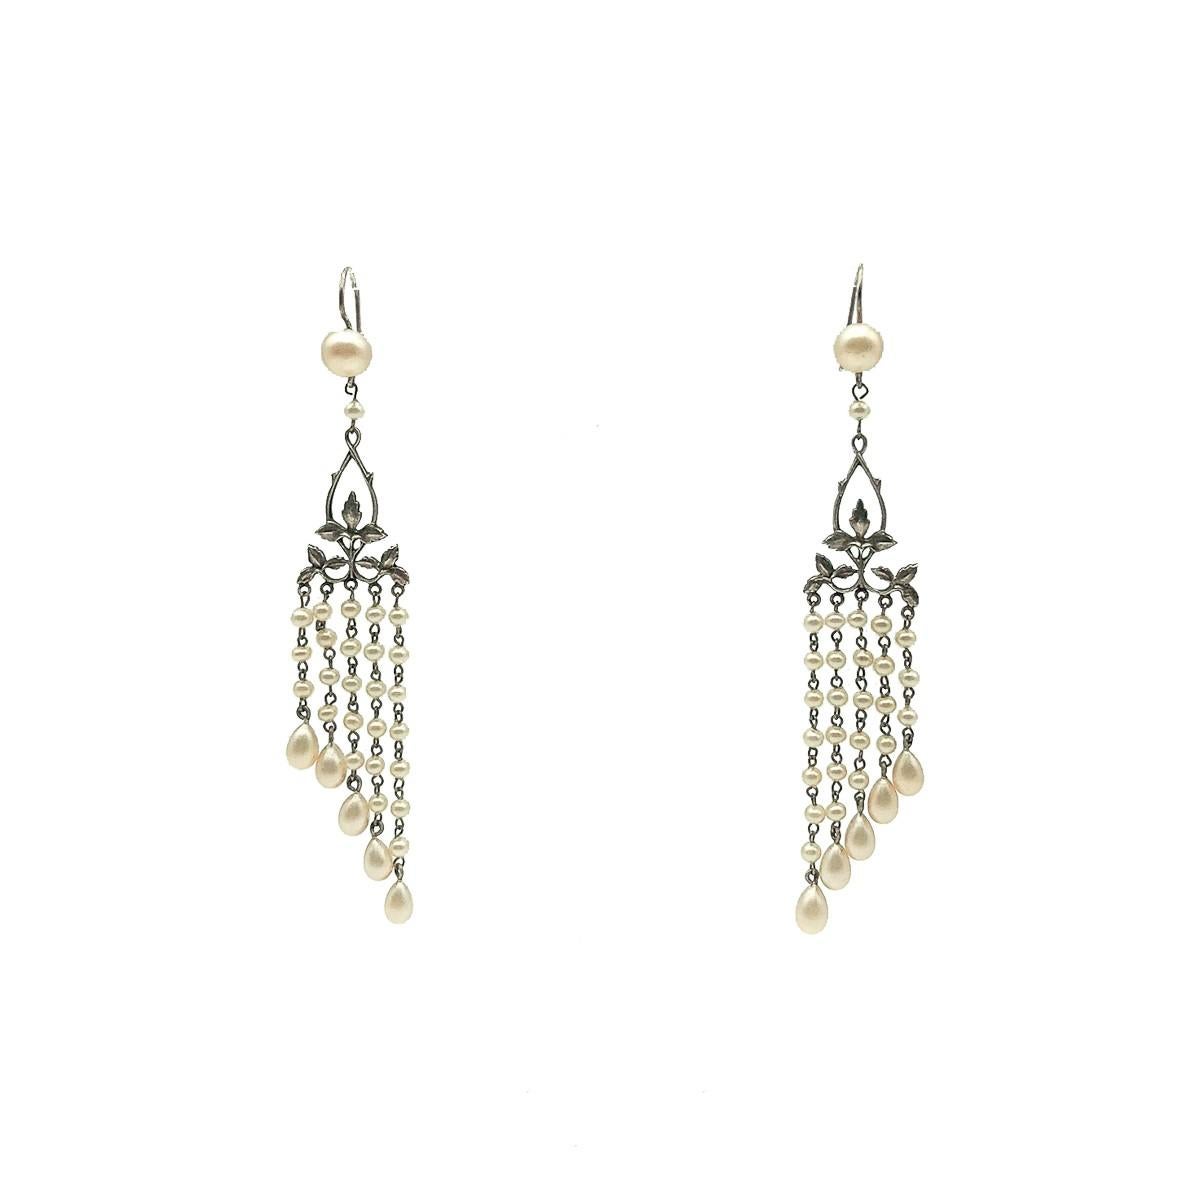 A rare pair of seriously elegant Antique Pearl Droplet Earrings created around 1920 which was undoubtedly the era of the long earring; a key accessory for the modern woman breaking from tradition to create her flapper style look. Crafted in silver